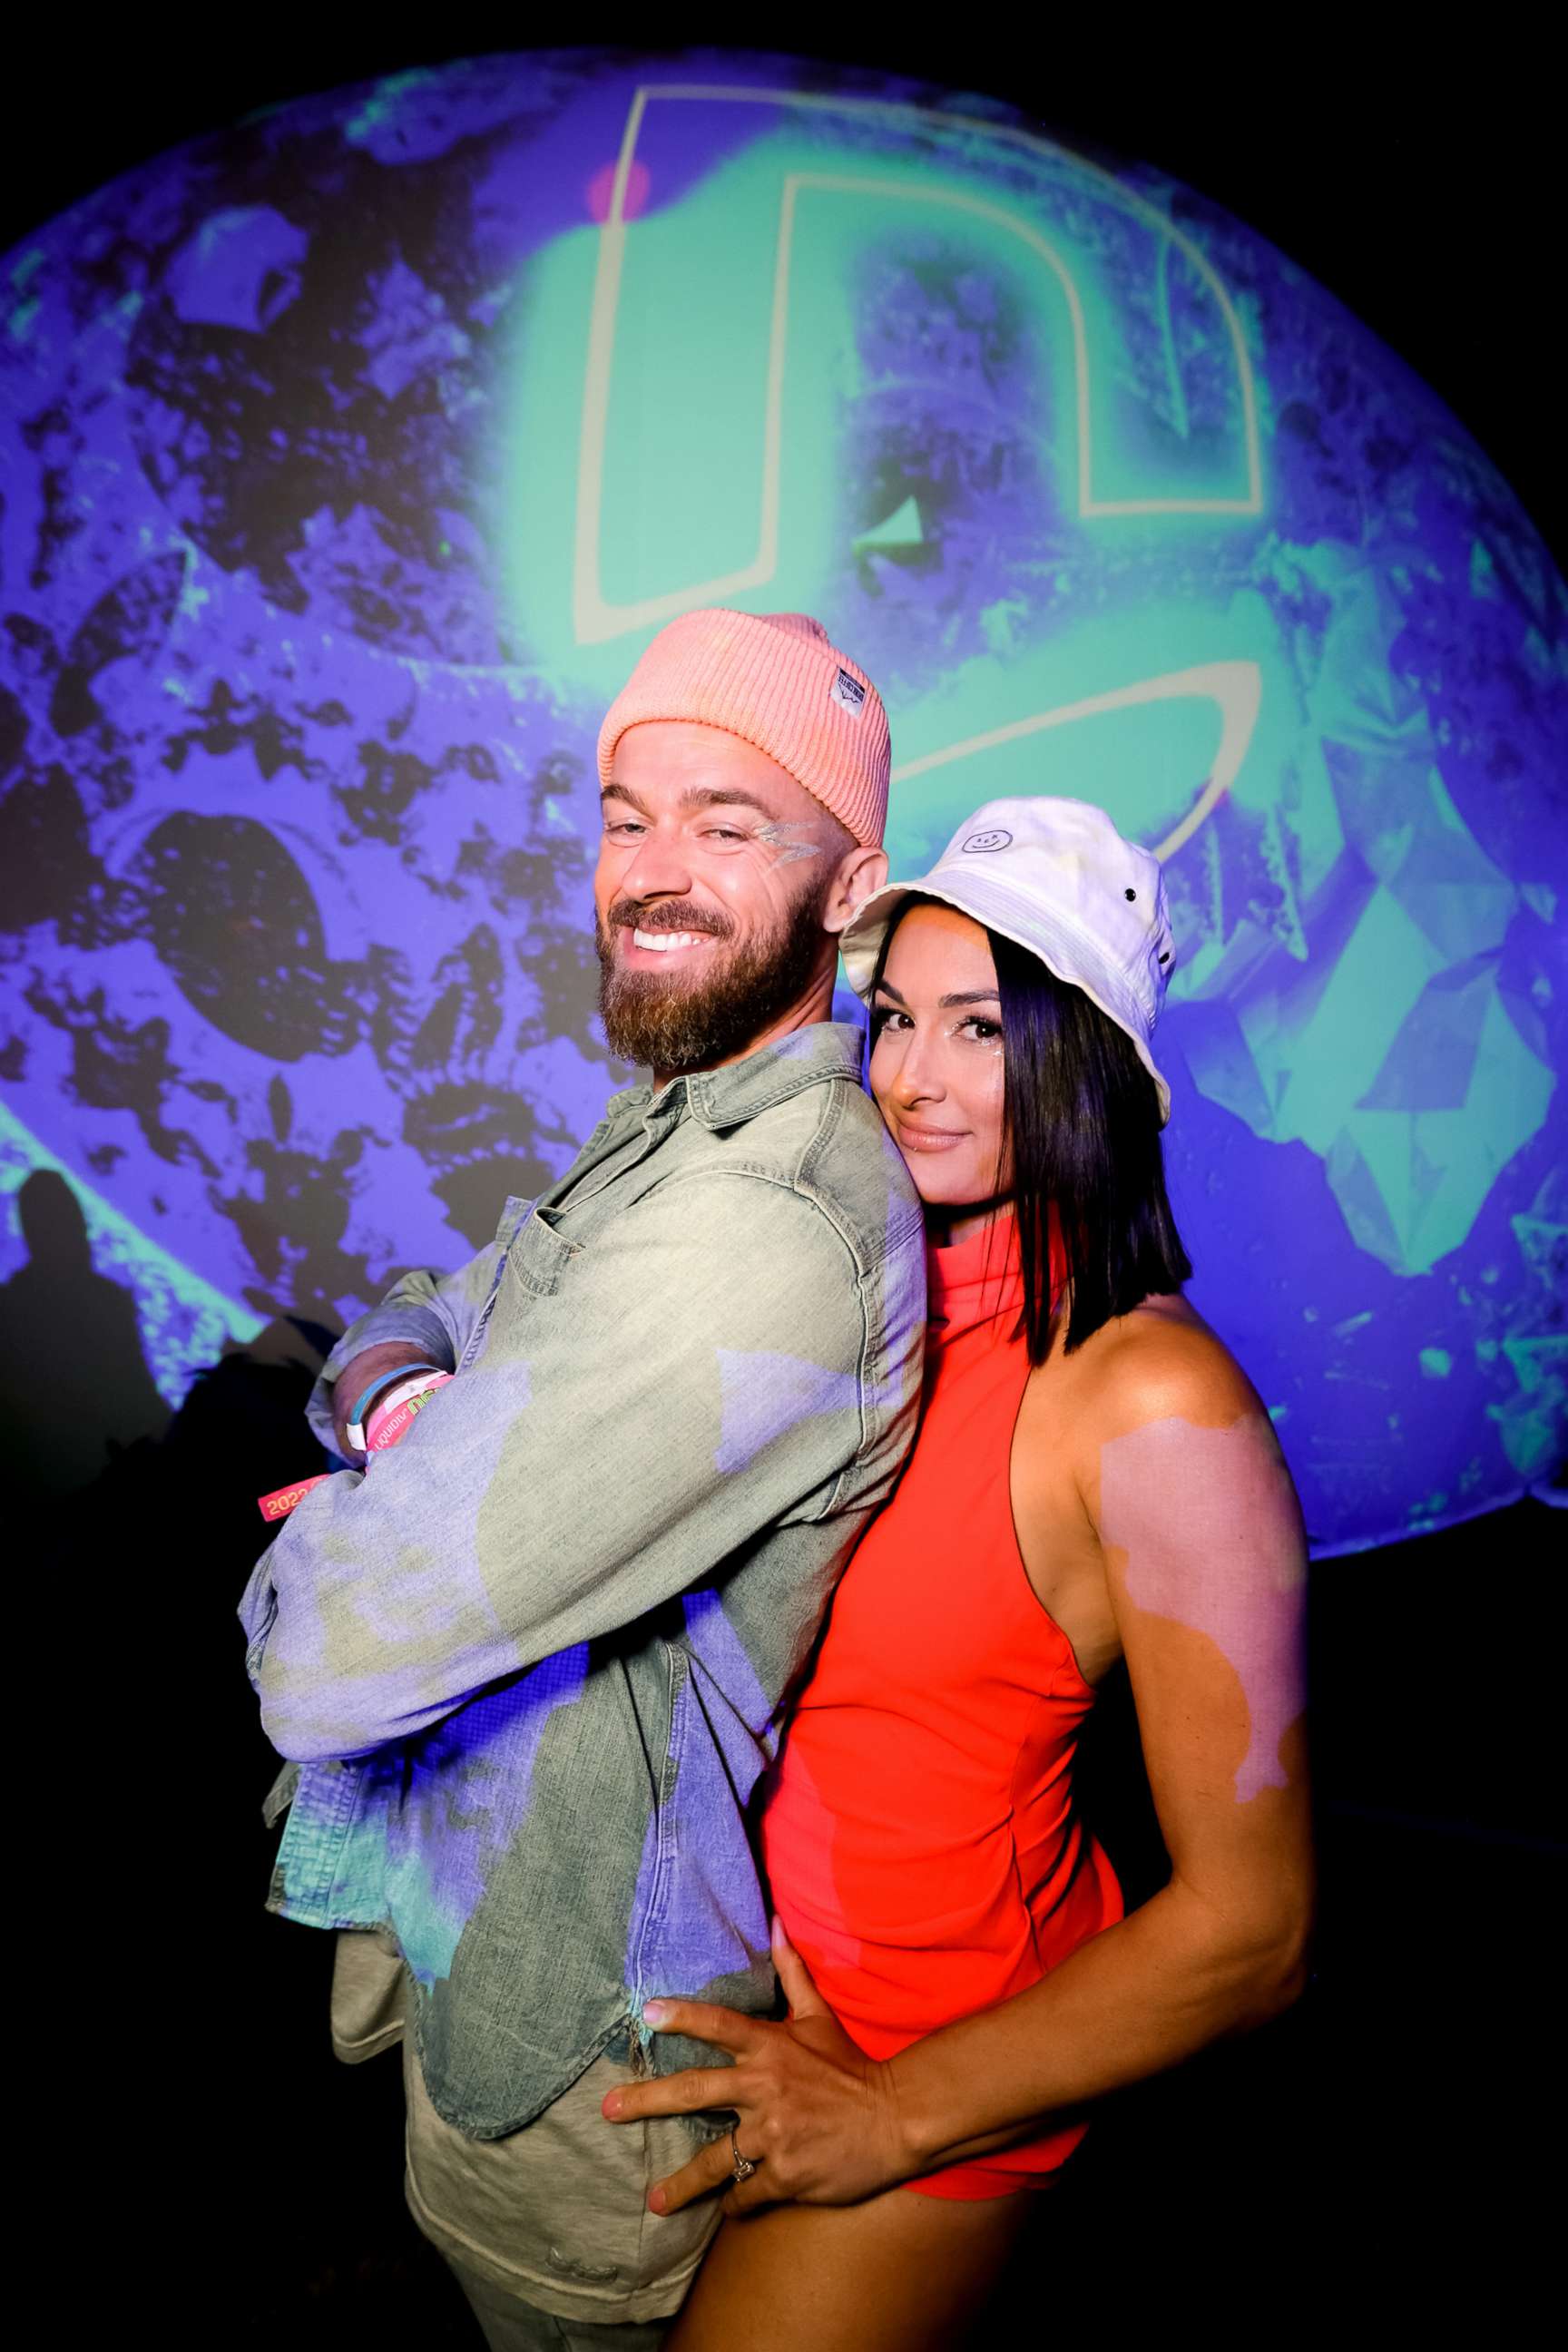 PHOTO: In this April 16, 2022, file photo, Artem Chigvintsev and Nikki Bella attend an event in Thermal, Calif.